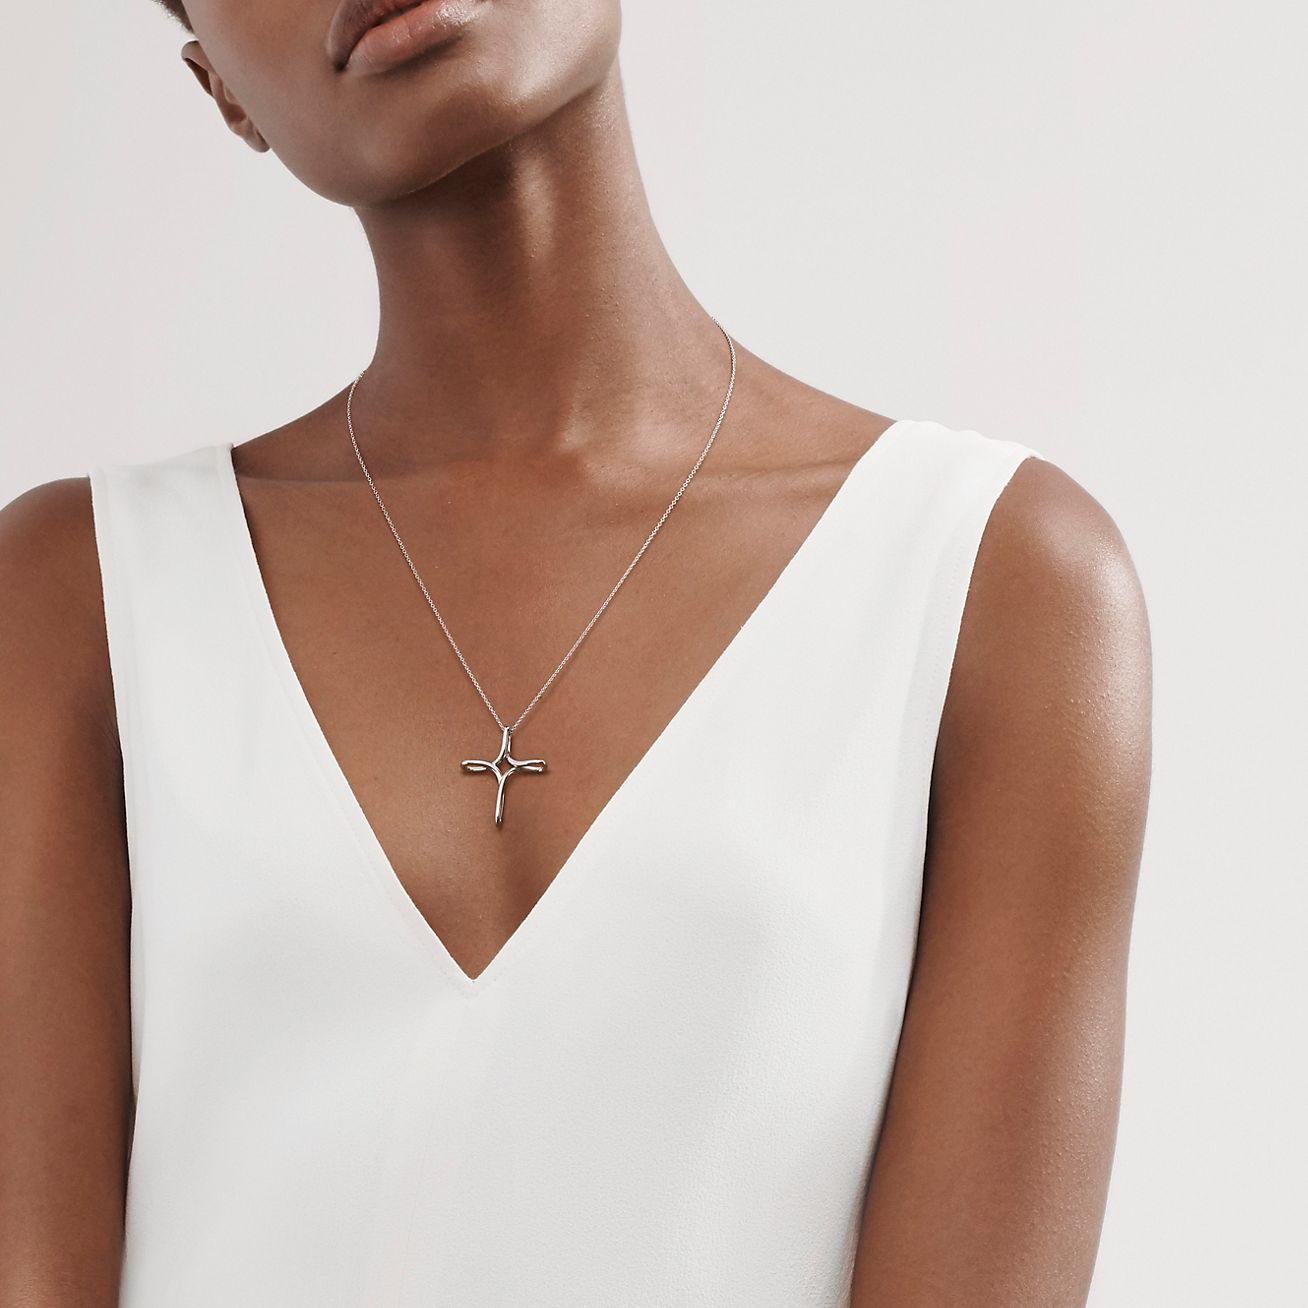 tiffany sterling silver cross necklace